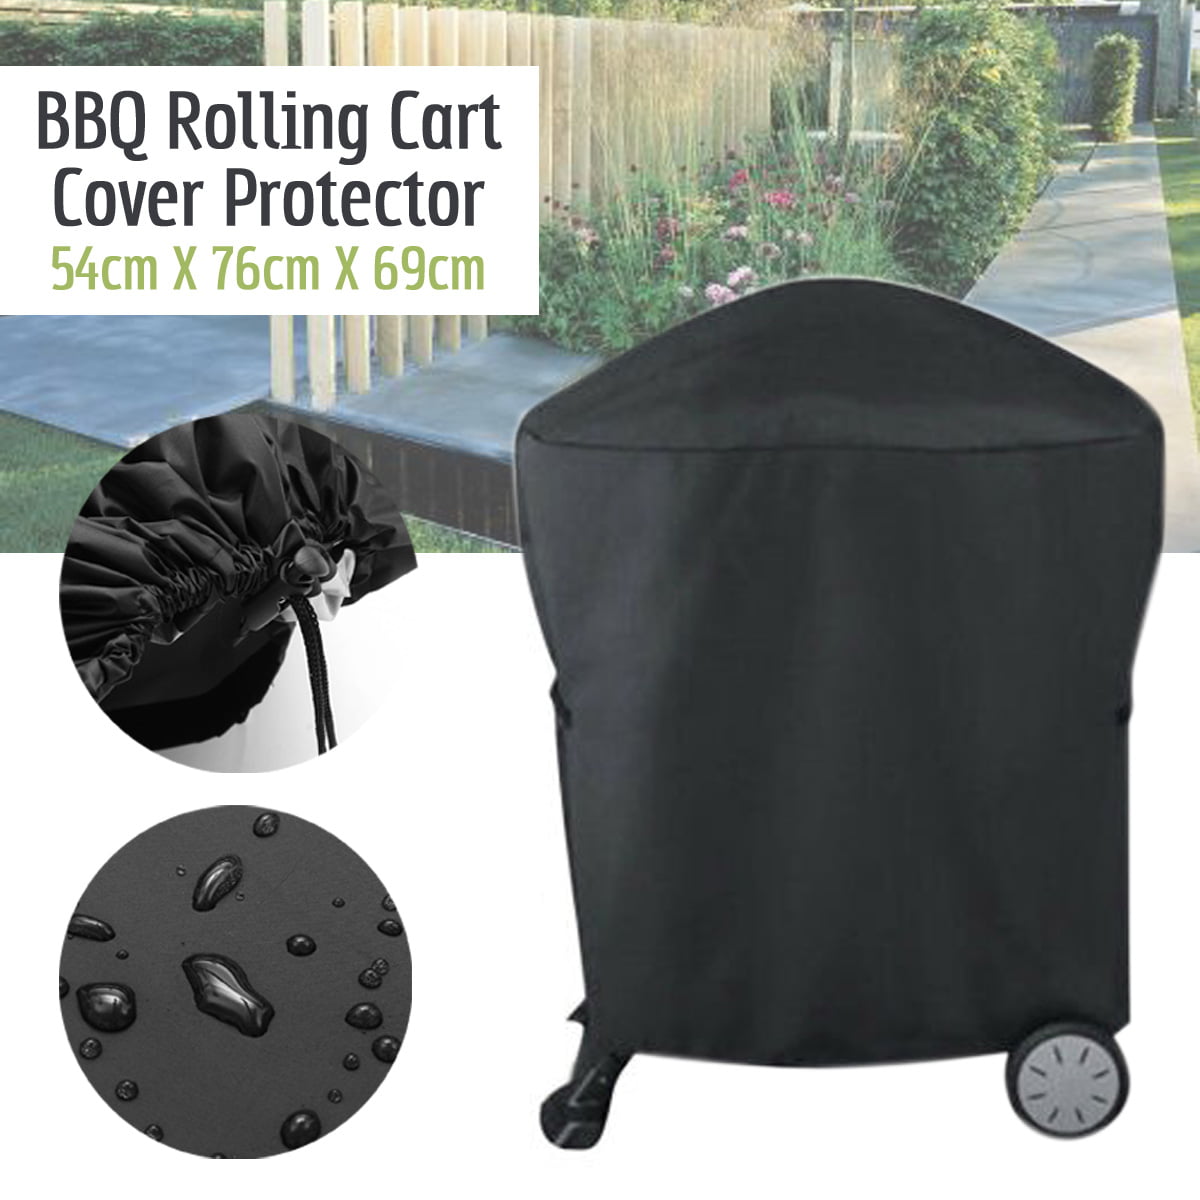 BBQ Cover Small Patio Waterproof Outdoor Garden Barbecue Grill Storage Protector 